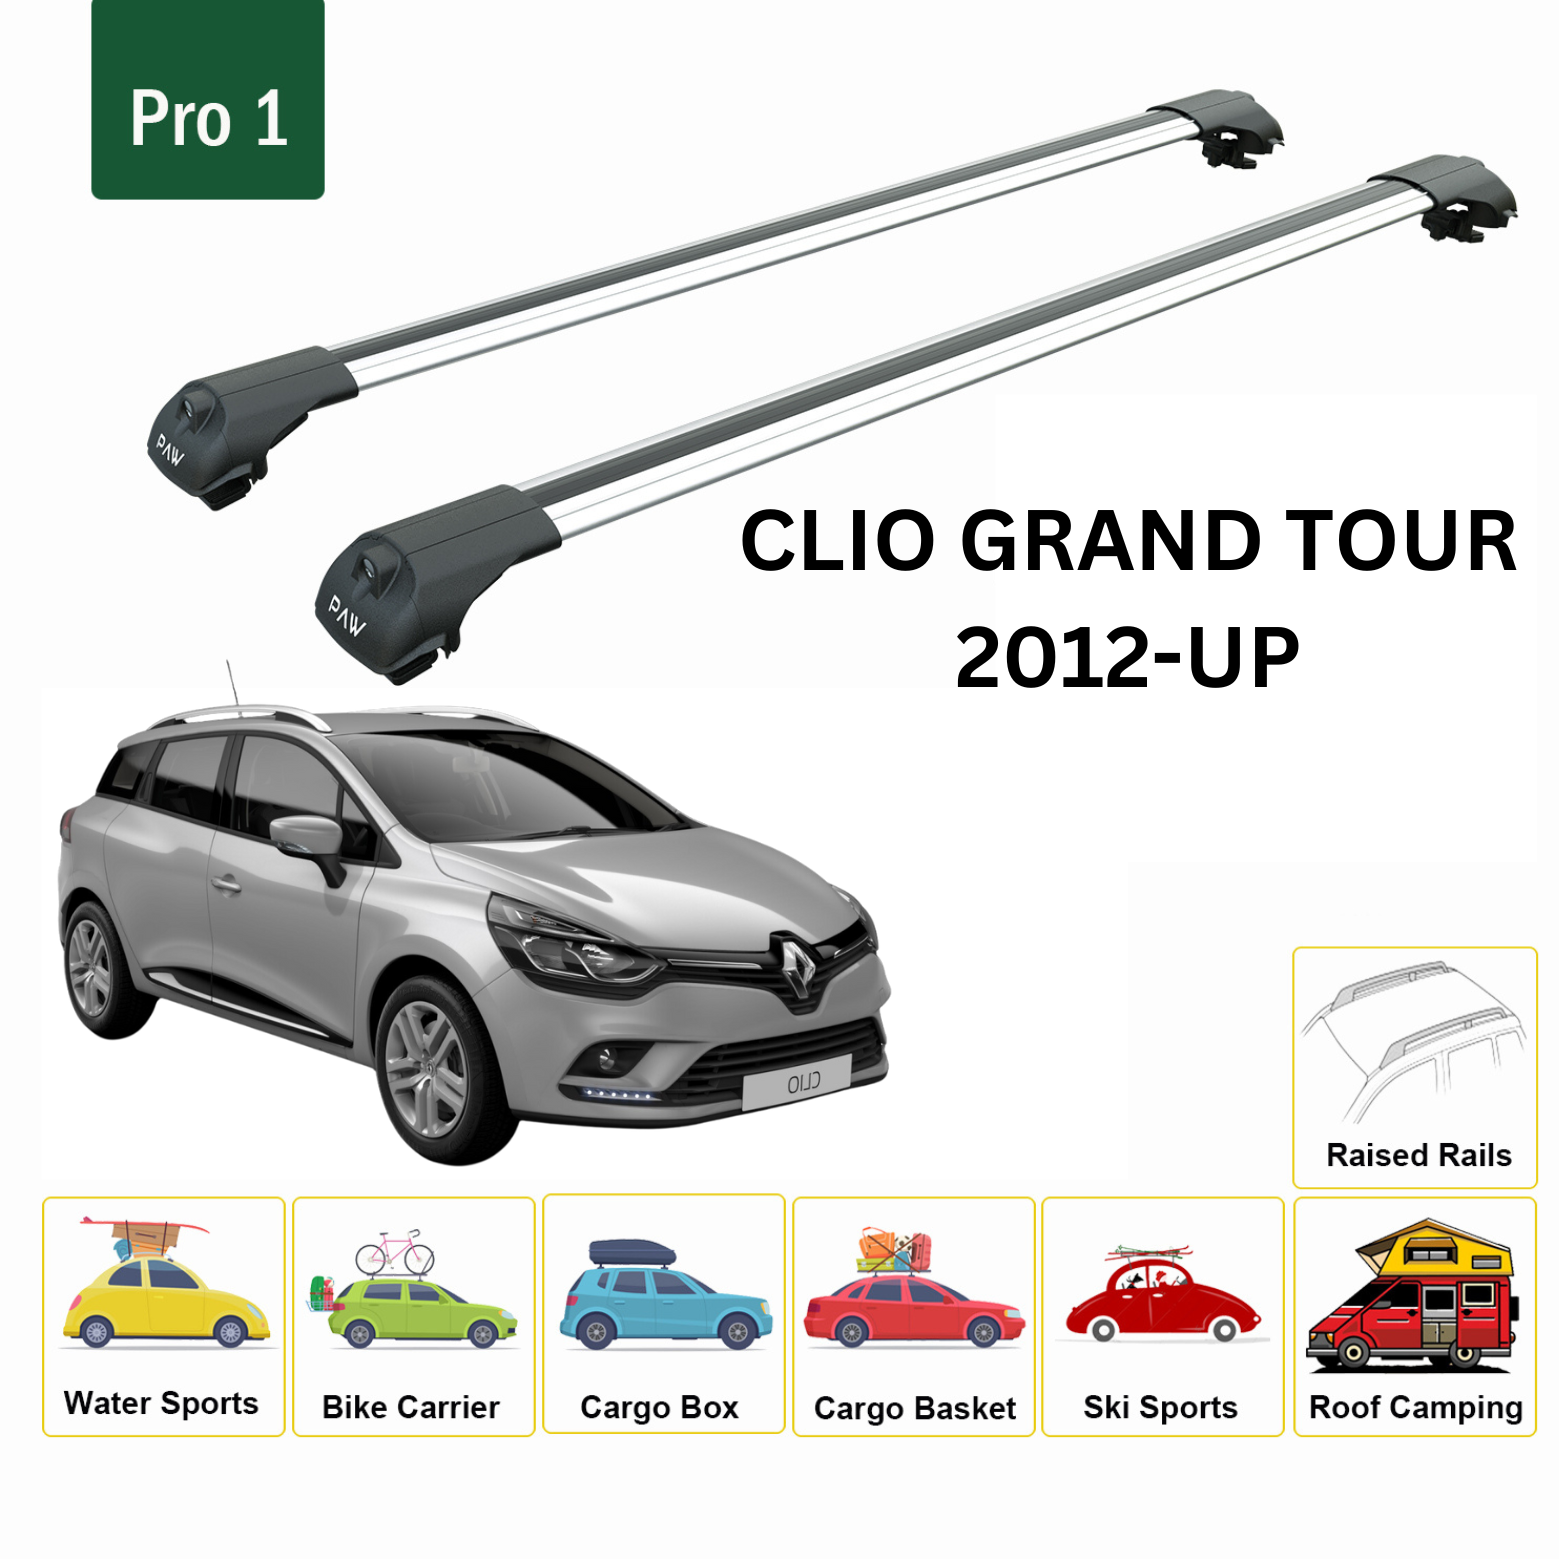 For Renault Clio Grand Tour 2012-Up Roof Rack System, Aluminium Cross Bar, Metal Bracket, Normal Roof, Silver - 0